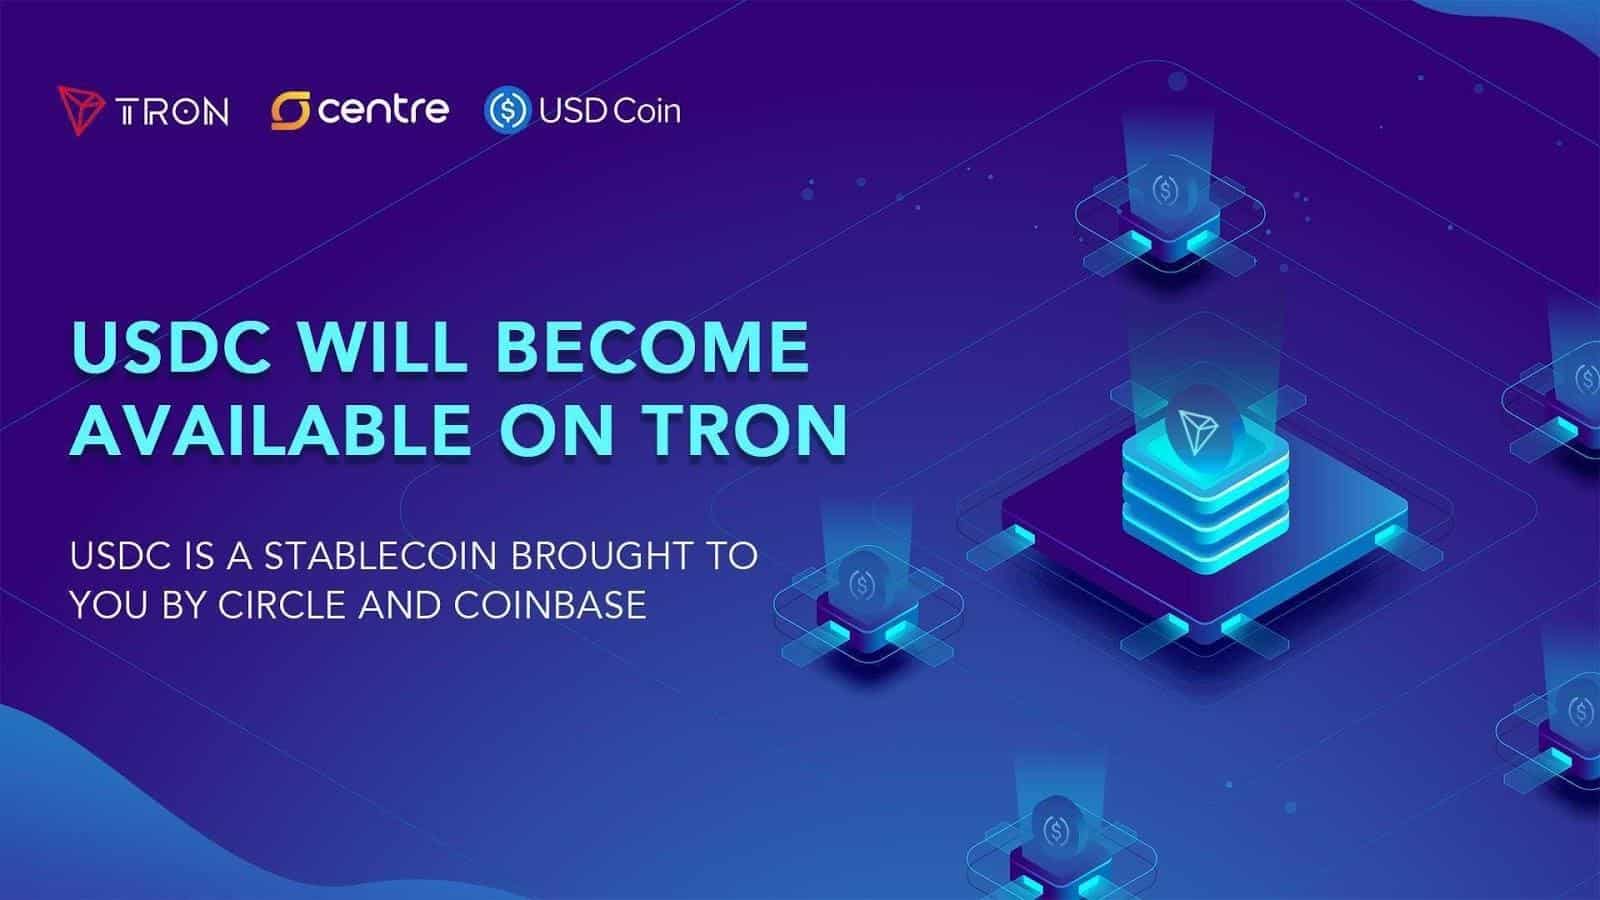 Stablecoin-usdc-expands-to-the-tron-ecosystem-ushering-in-a-new-round-of-development-opportunities